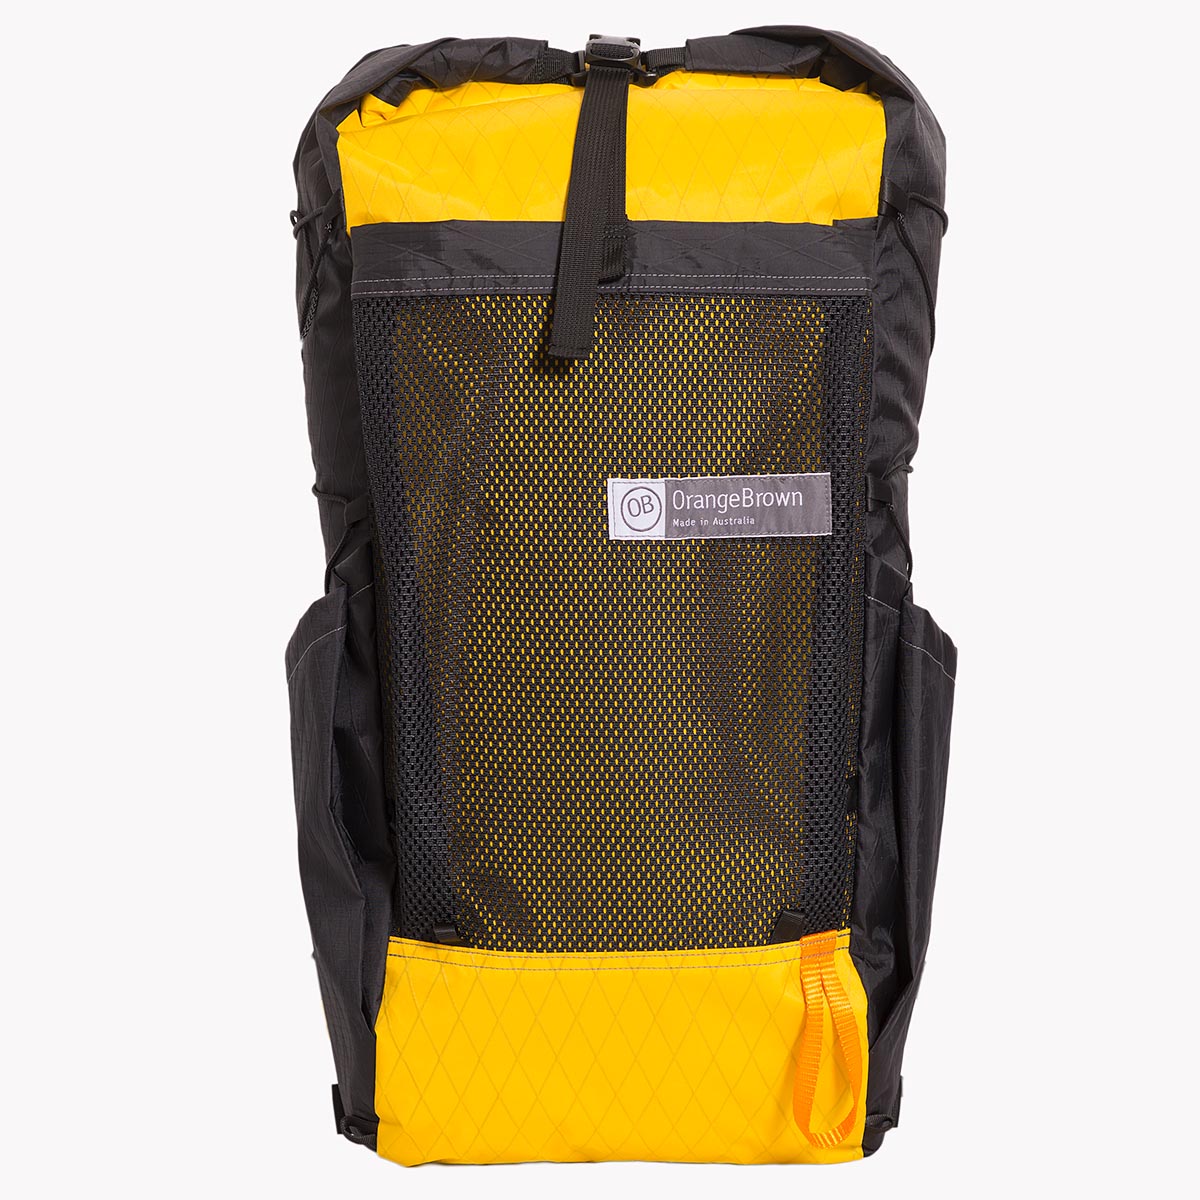 Medium sized backpack in yellow and black X-Pac fabric. The pack has a volume of 36 L including two side pockets and a front mesh pocket. Side compression cord with a Line Loc 3 and an orange webbing loop to fix the trekking poles. Made in Australia.